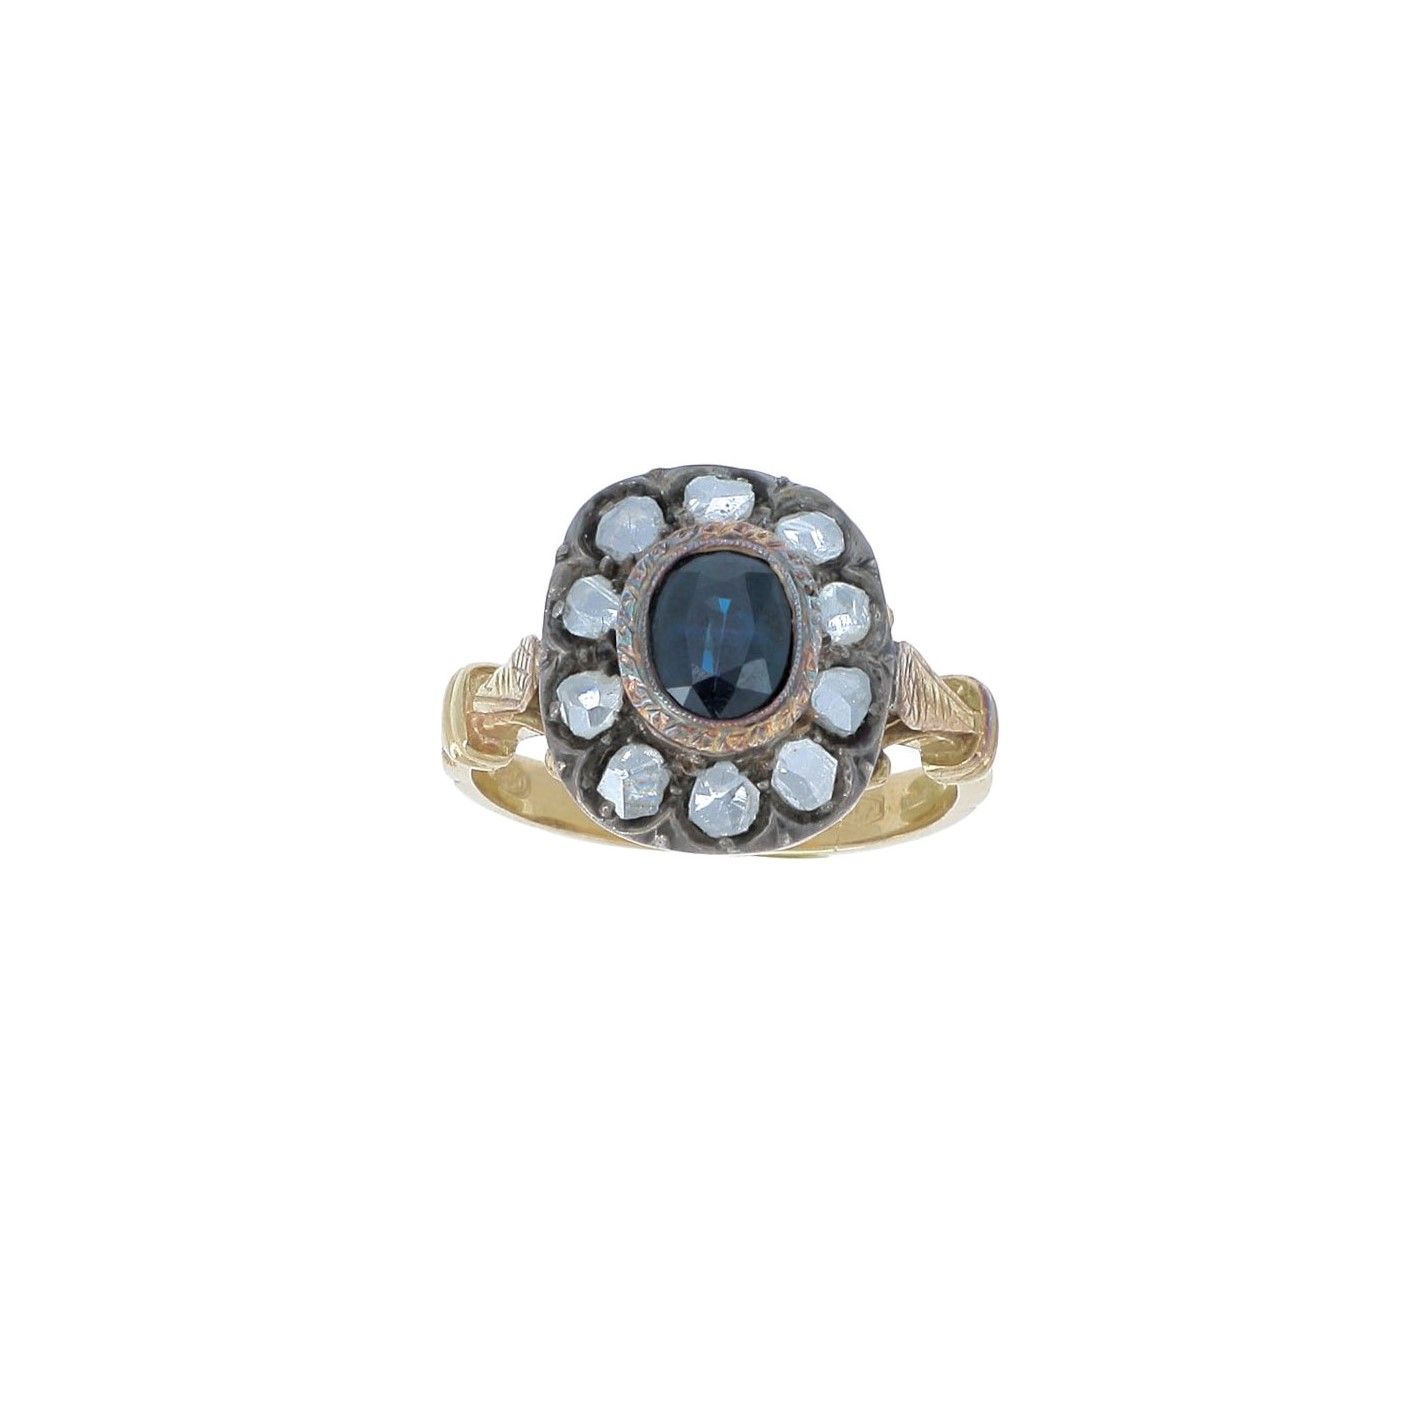 Null DAISY RING

in yellow gold and silver, centered on an oval sapphire in a ci&hellip;